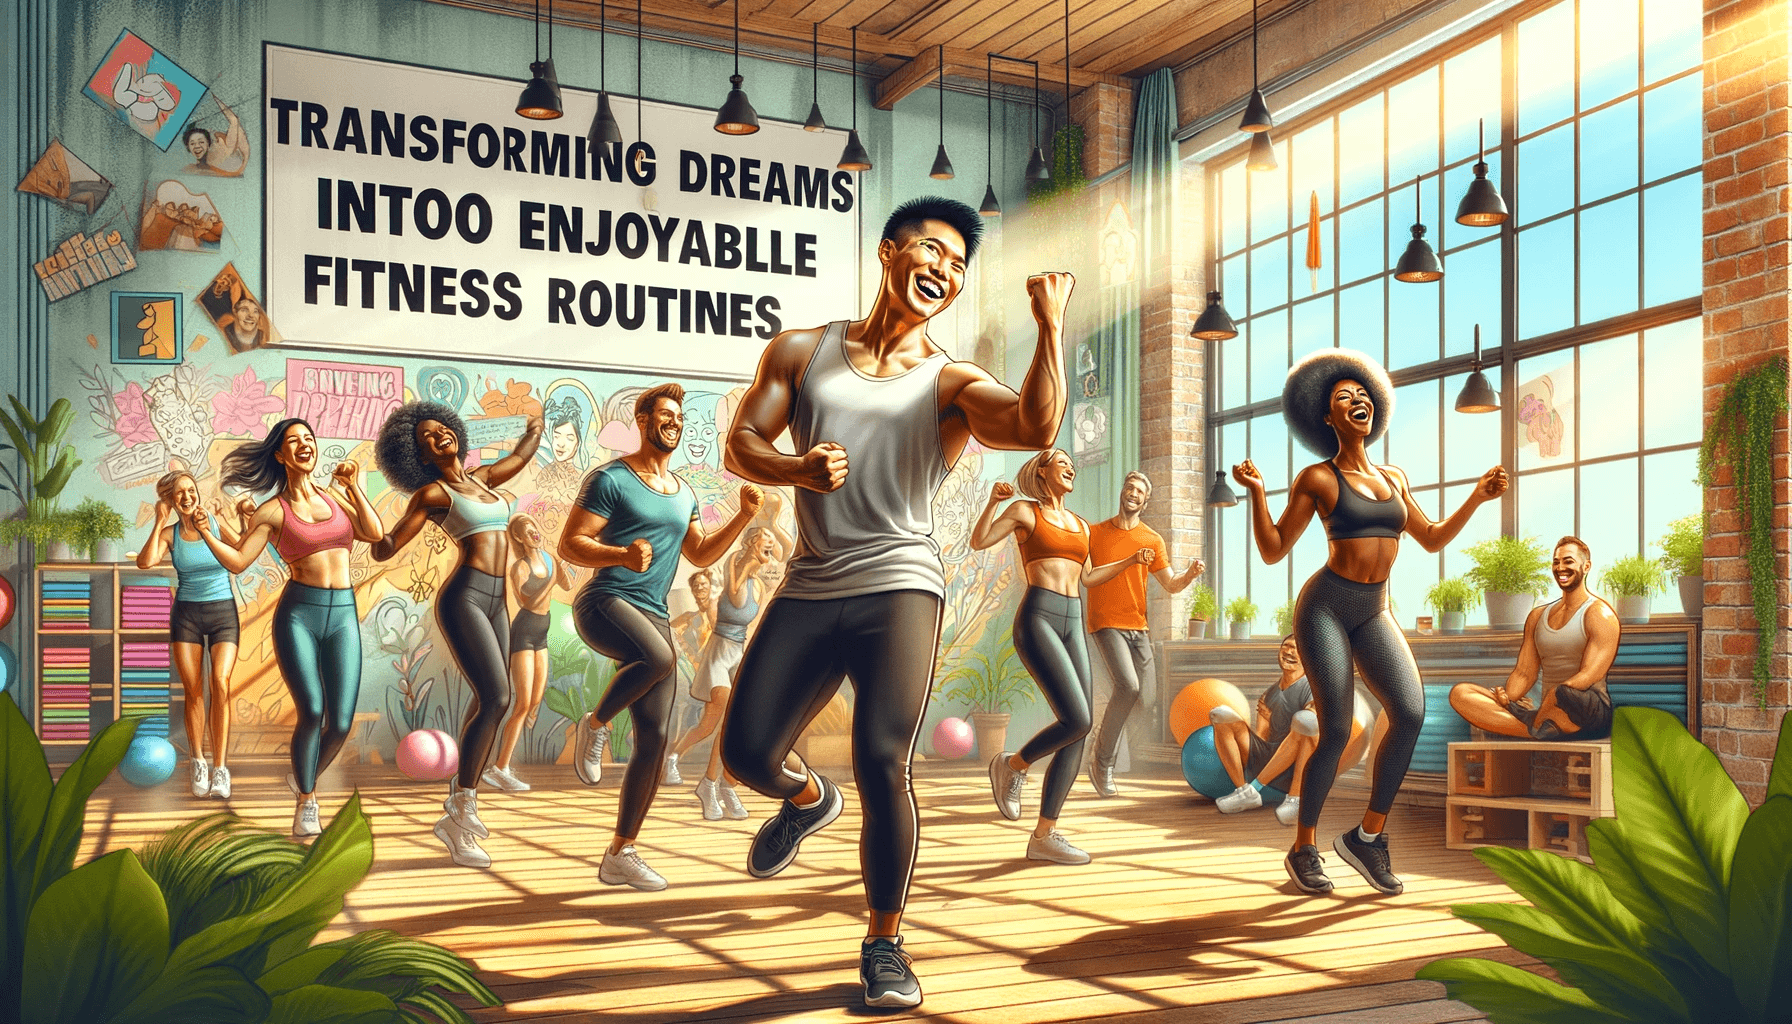 Transforming Dreams into Enjoyable Fitness Routines